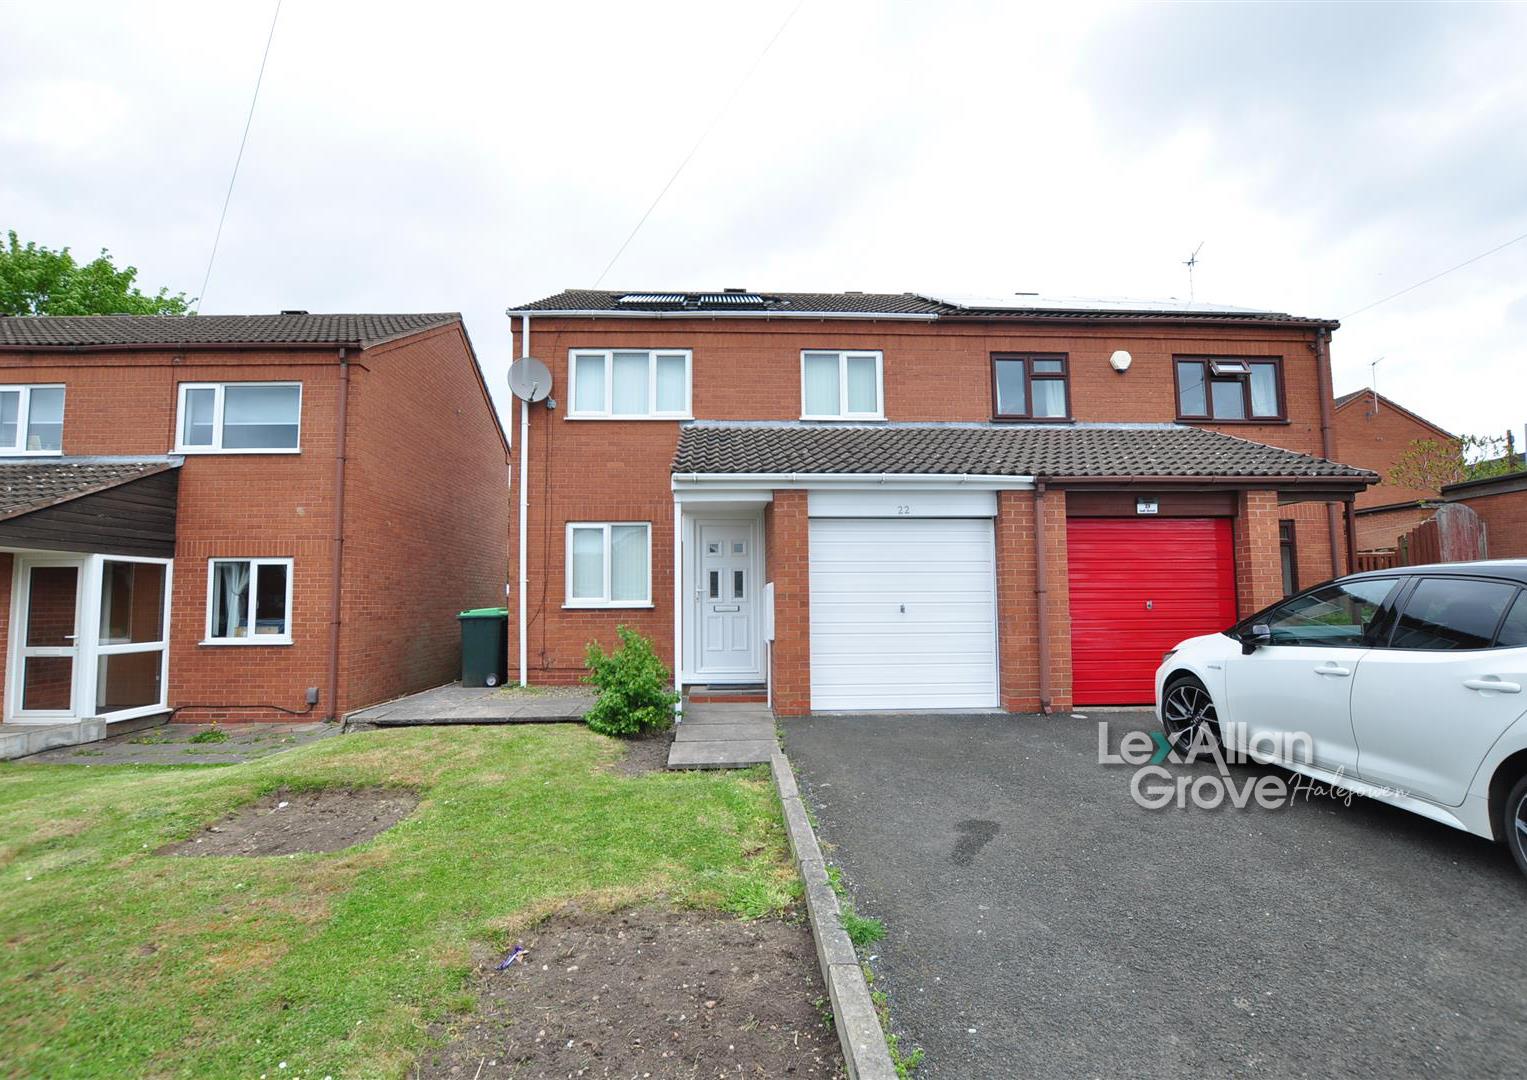 3 bed  for sale in Hall Street, Cradley Heath, B64 